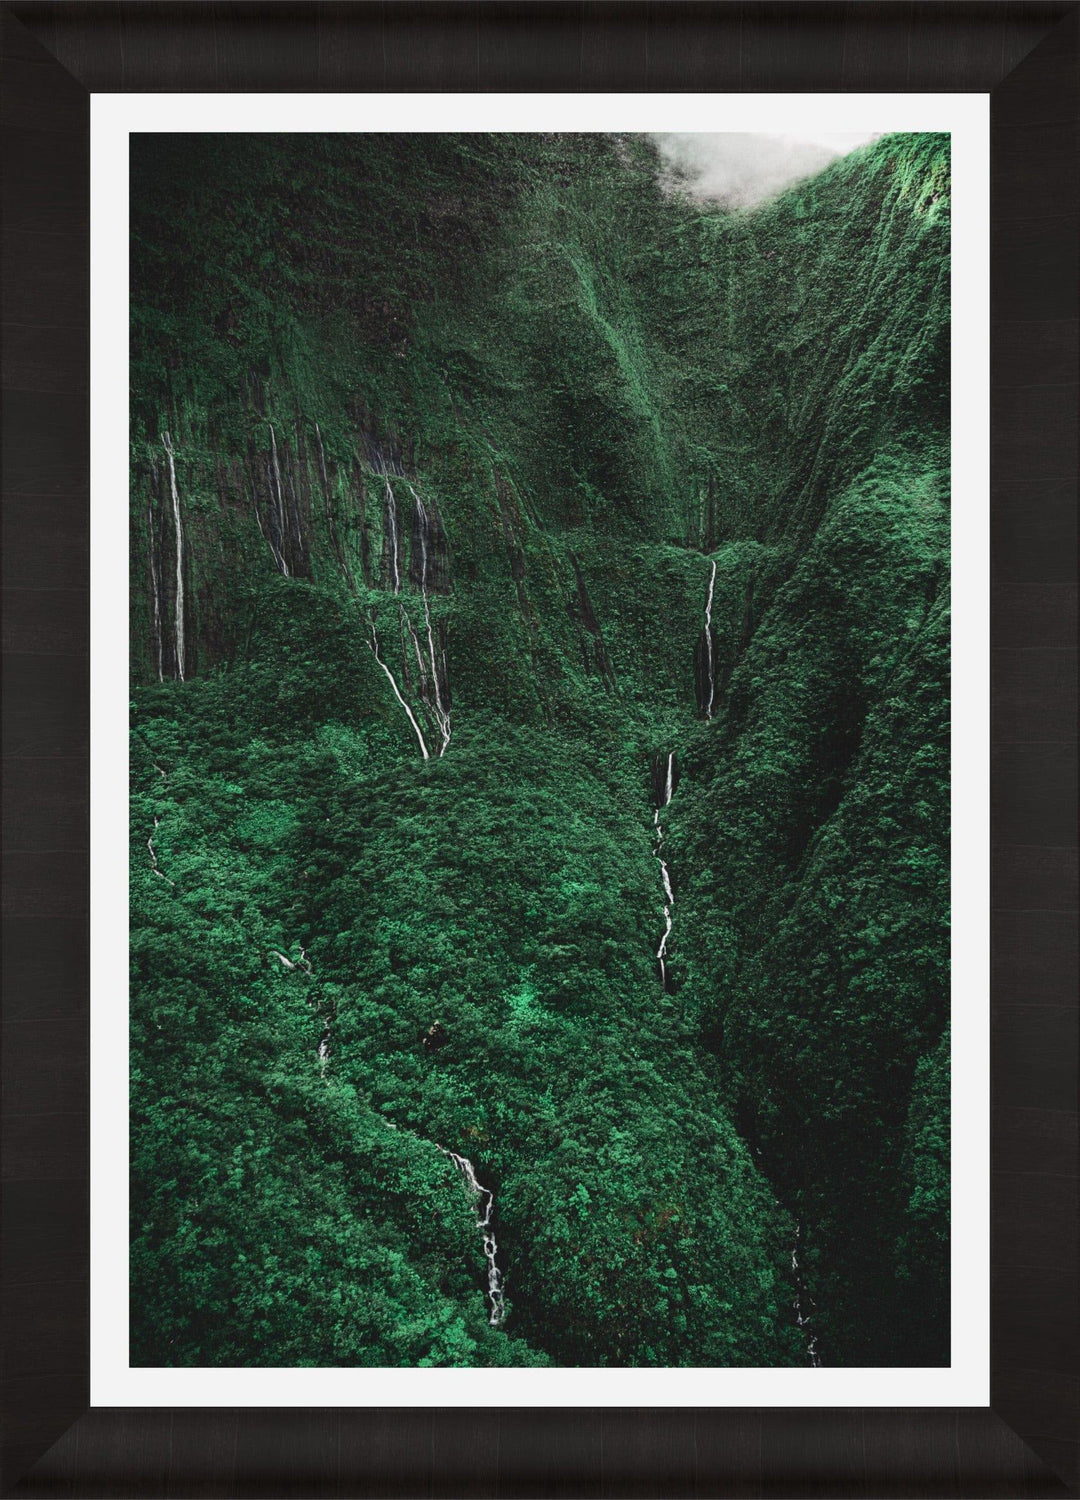 Cascading Tears | Valley of Tears Unveiled - Living Moments Media - 3500-5500, 800-3500, Acrylic, aerial, Artwork, Best Moments, Best Sellers, Best Wall Artwork, black, Canvas, clouds, green, Hawaii, Helicopter, Island, maui, Maui Hawaii Fine Art Photography, Maui Hawaii Wall Art, Metal, Moody, Mountains, New Moments, open-edition, over-5500, Prints, rocks, size-16-x-24, size-24-x-36, size-40-x-60, Trees, vertical, Visual Artwork, Waihee, Water, Waterfalls, White